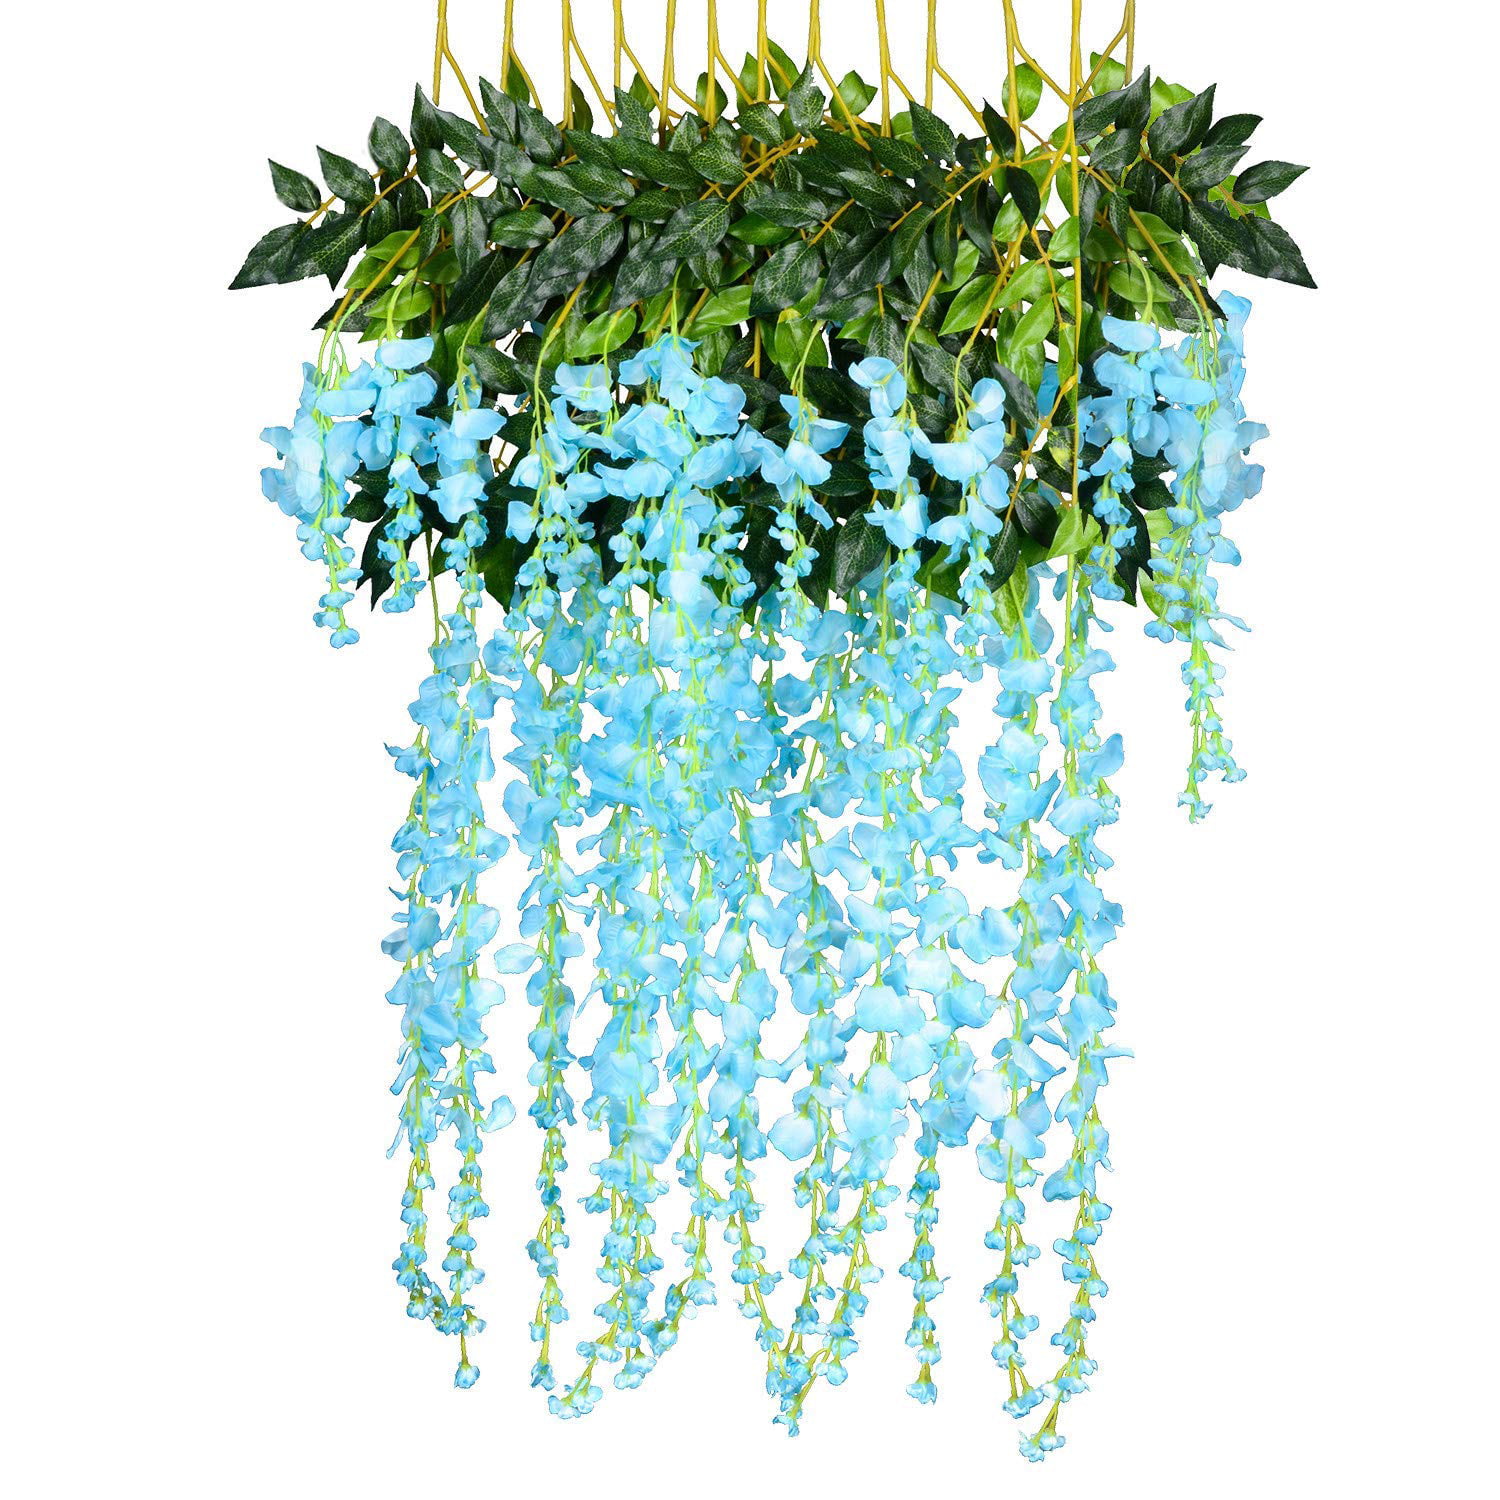 White YQing 12PCS//Lot 3.6feet//piece Artificial Flowers Fake Wisteria Vine Silk Flower for Wedding Decorations Home Garden Party Decor Simulation Flower